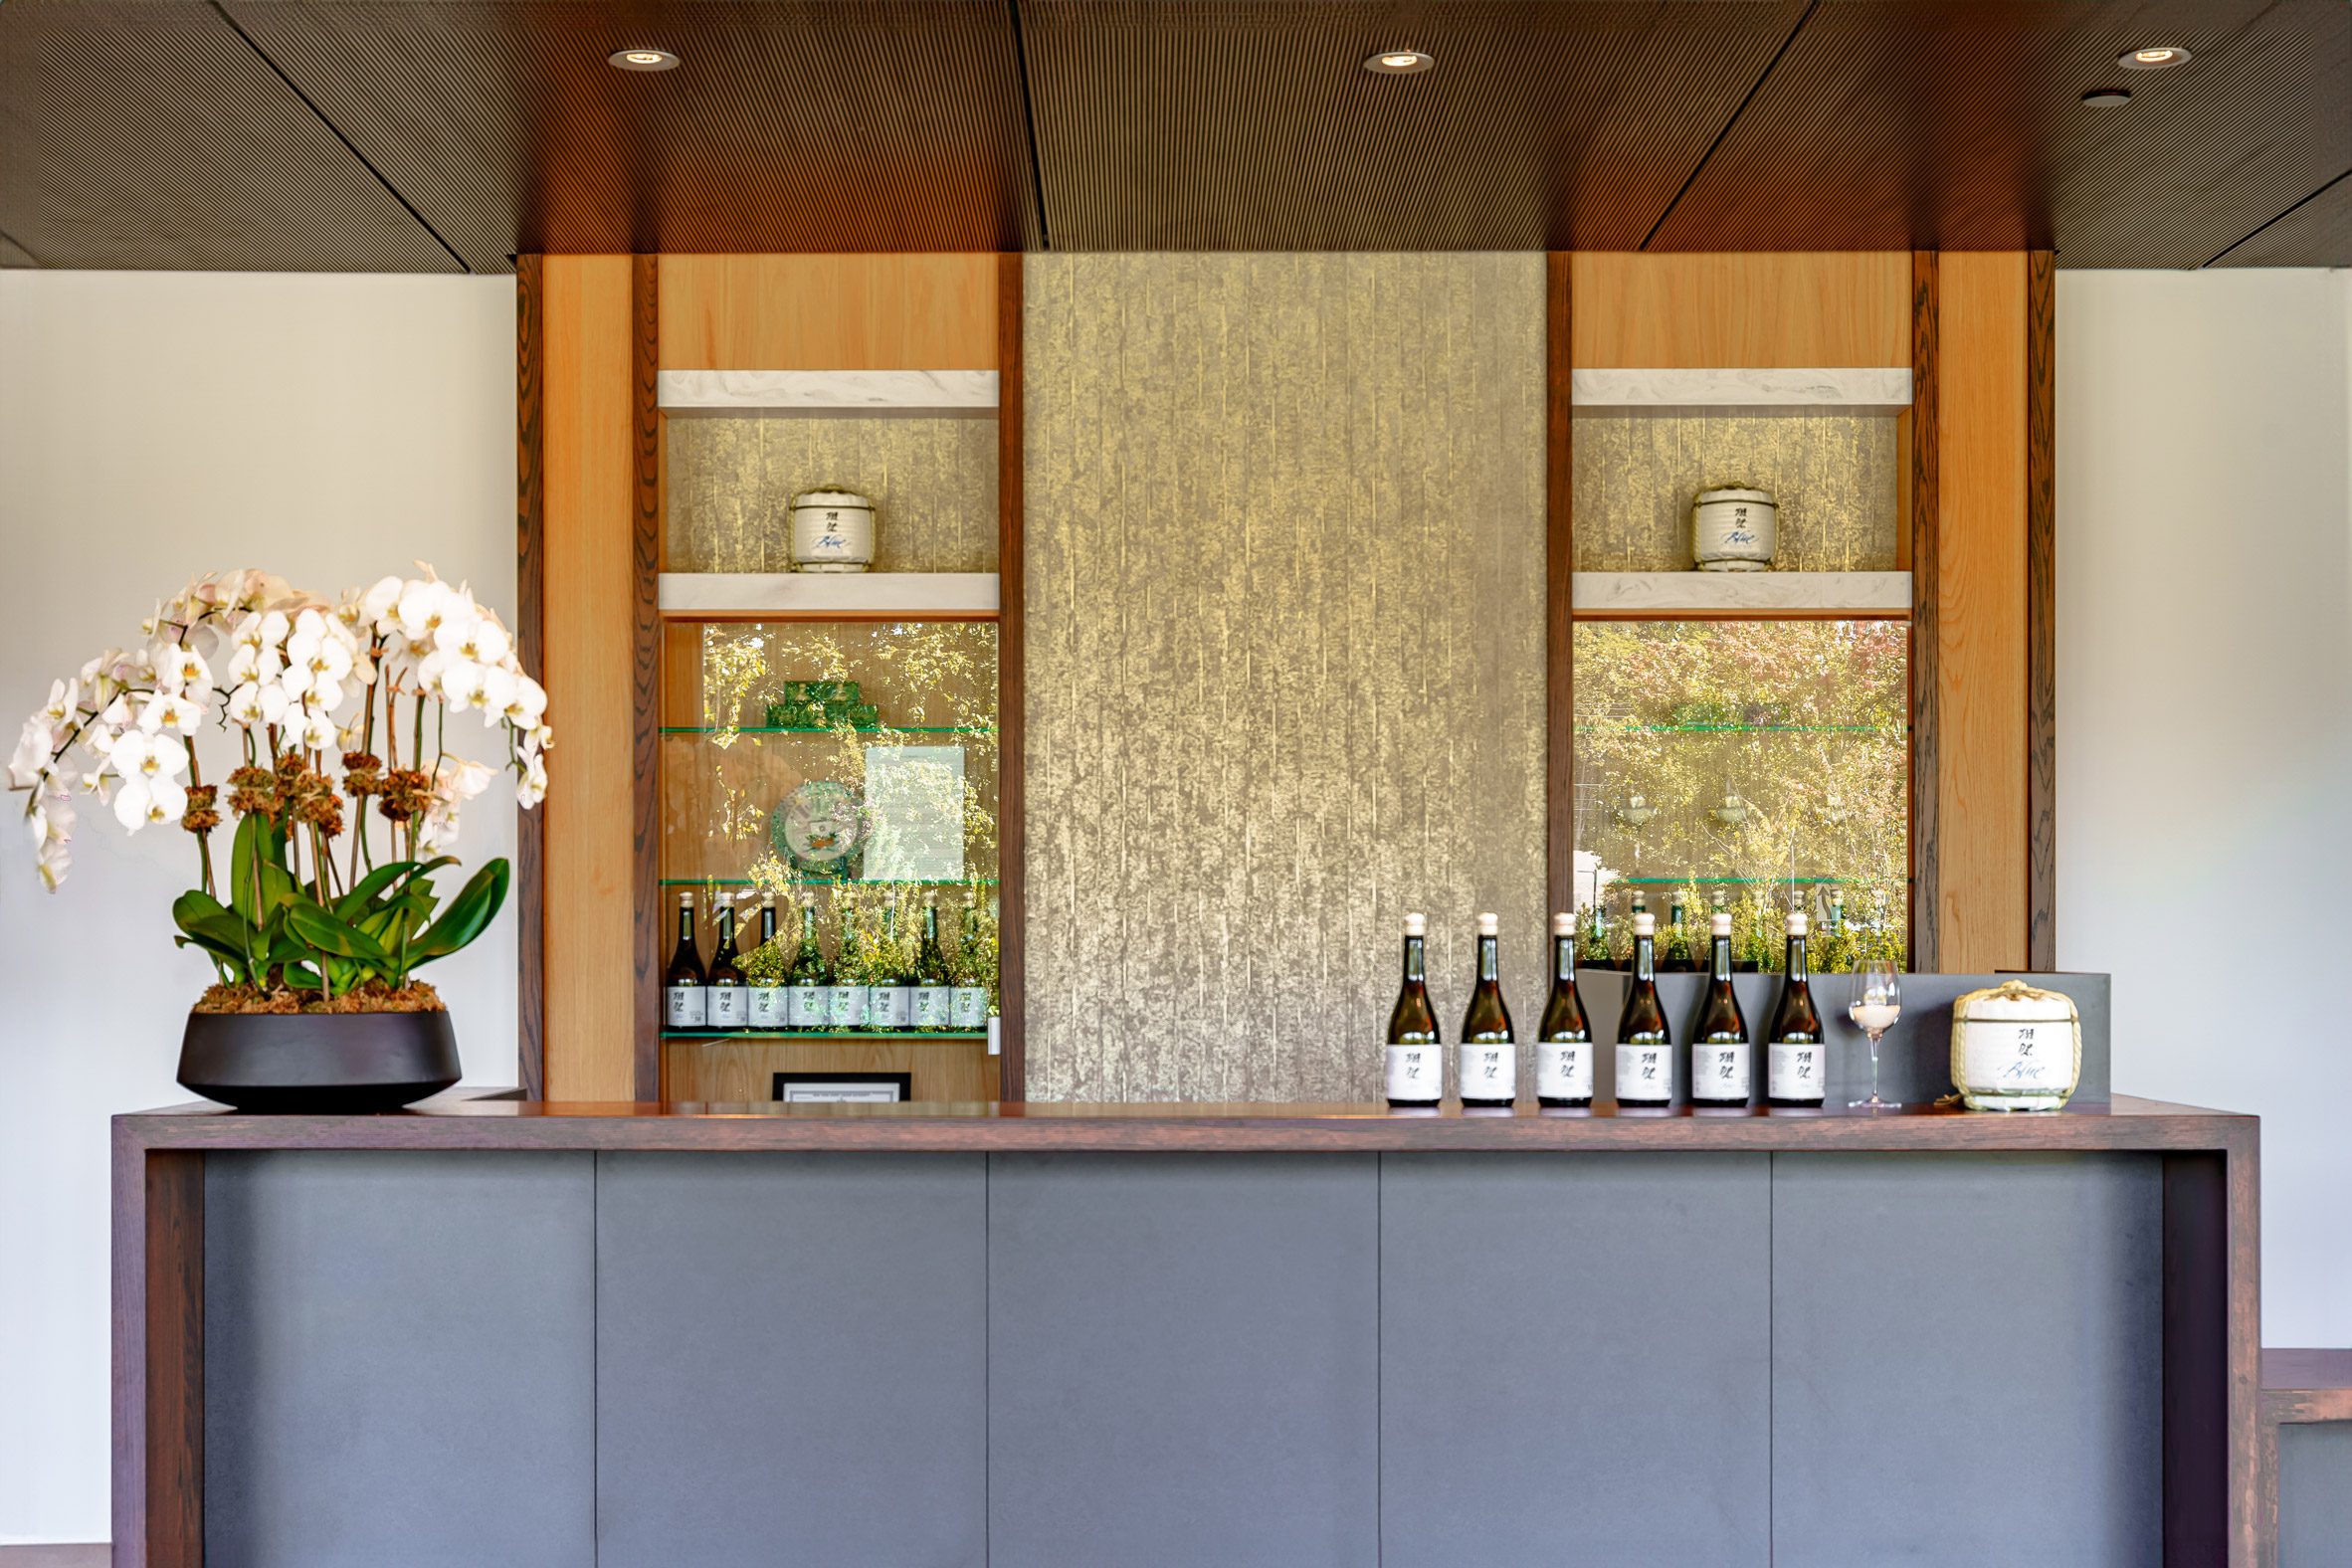 Tasting room with shelves and bottles